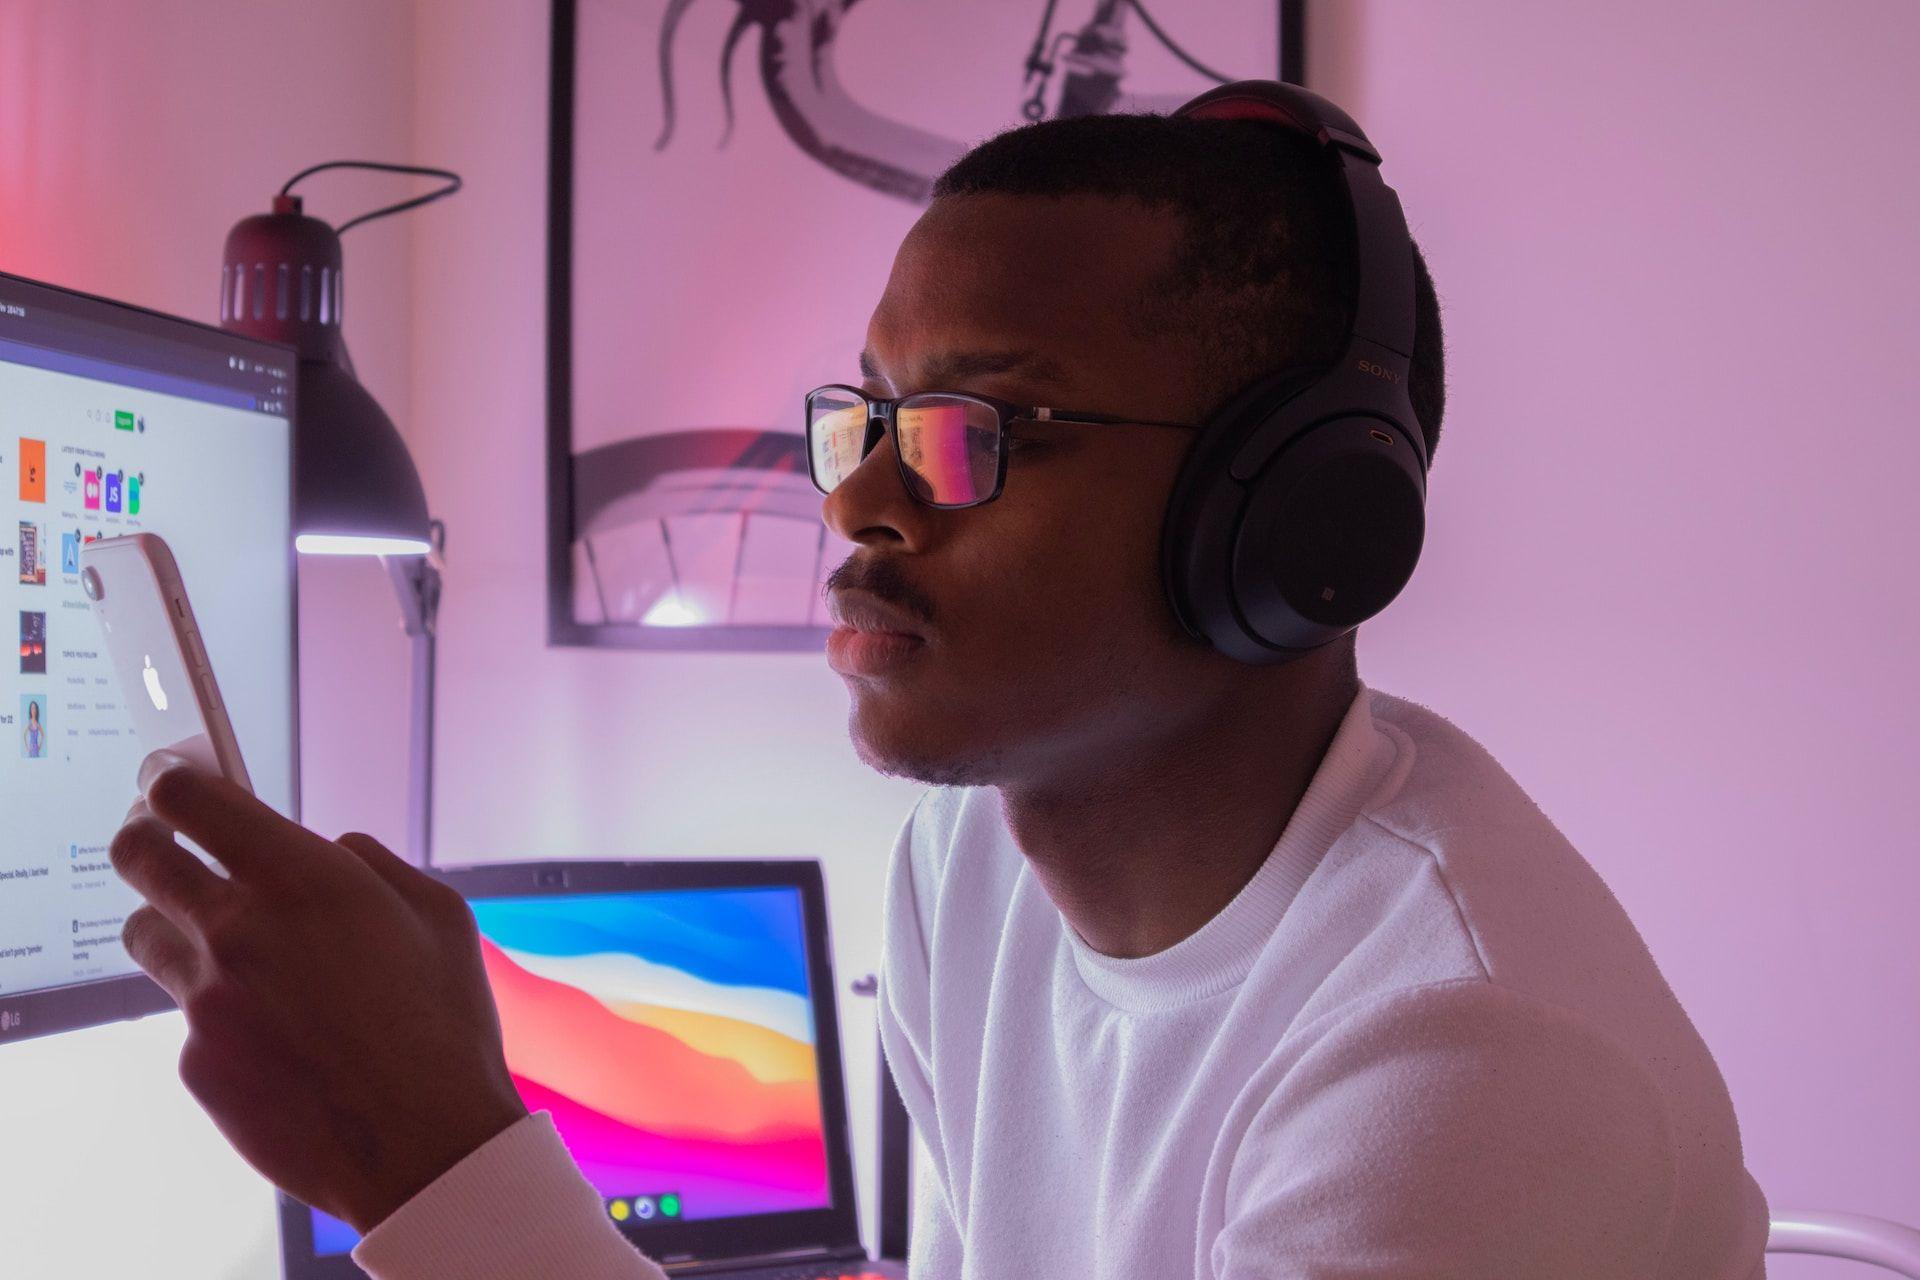 Man with headphones on phone with colorful monitor in background